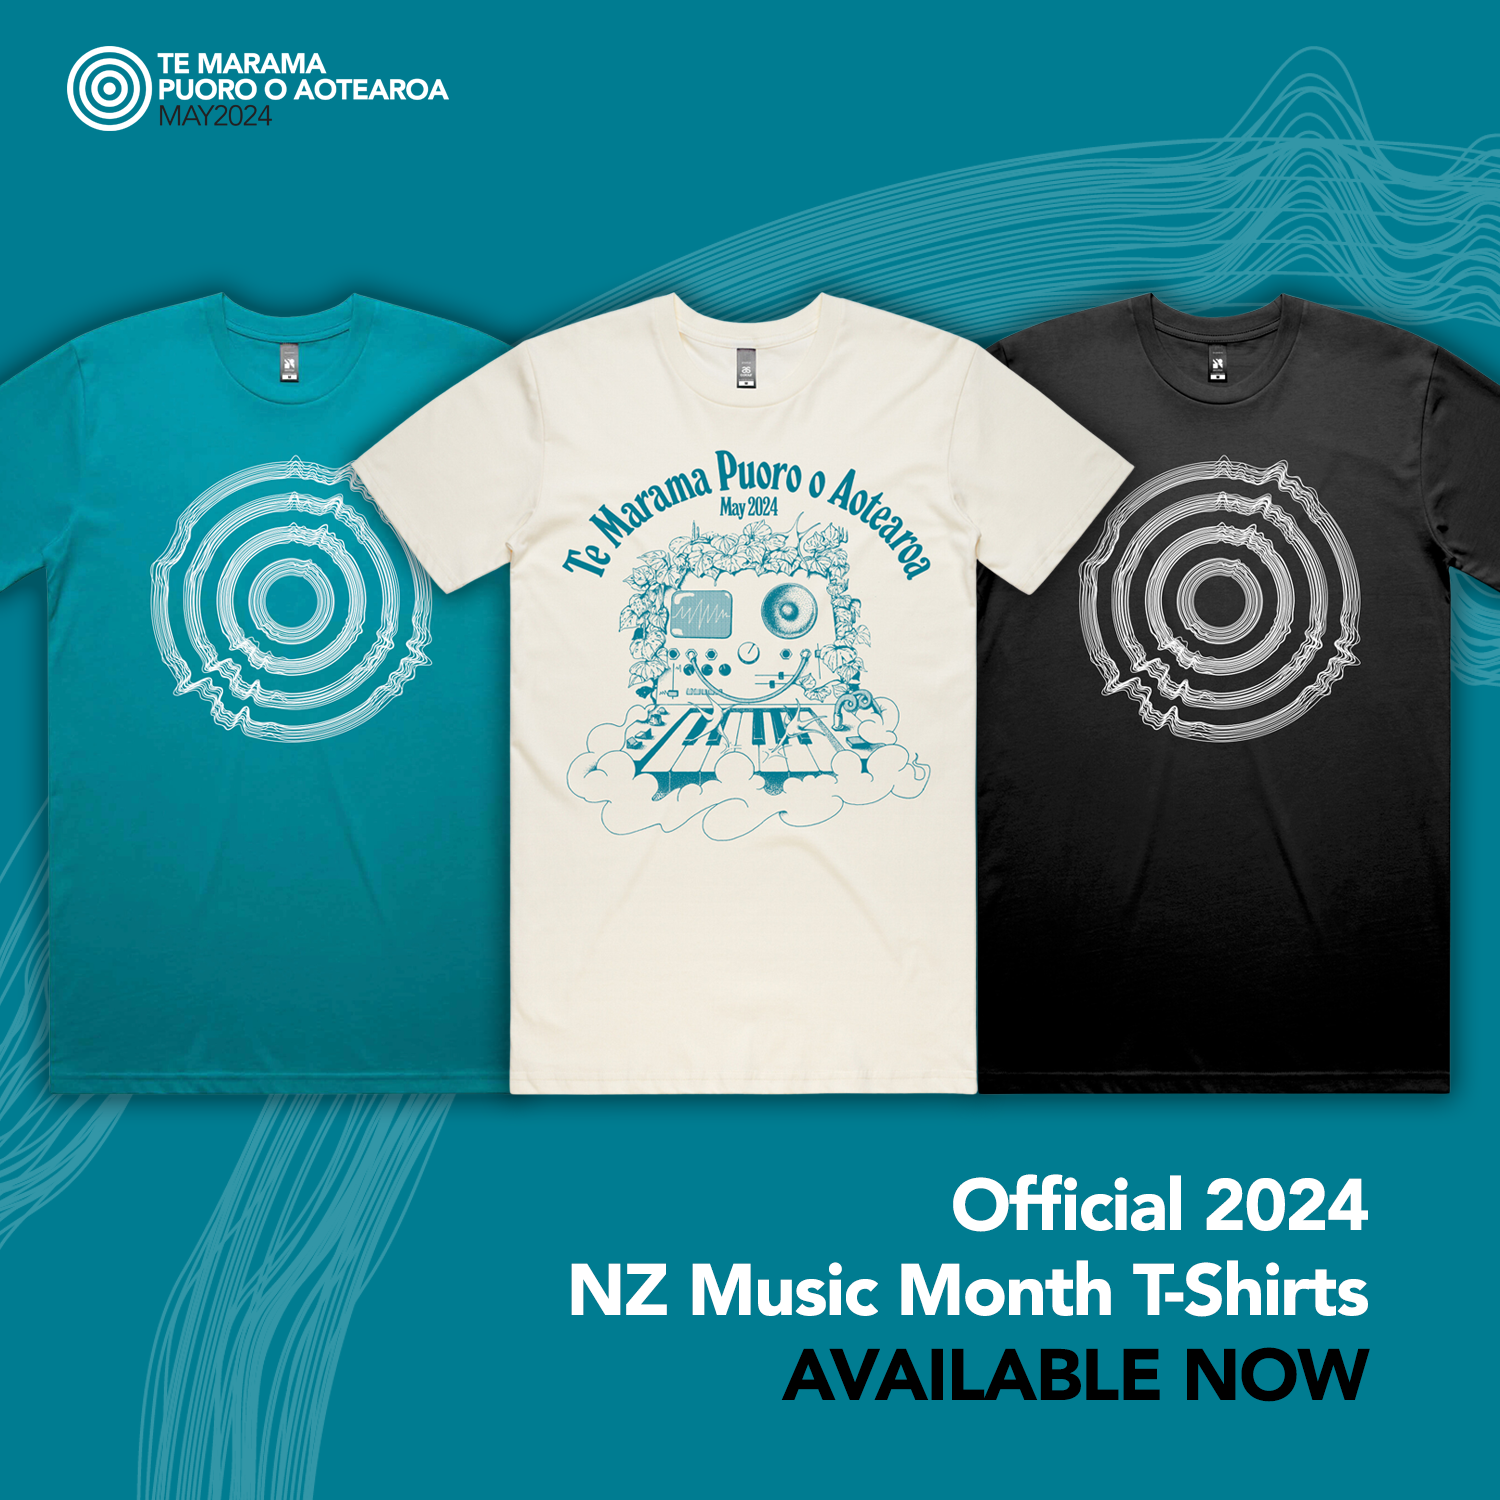 Official 2024 New Zealand Music Month T-Shirts – Available NOW!